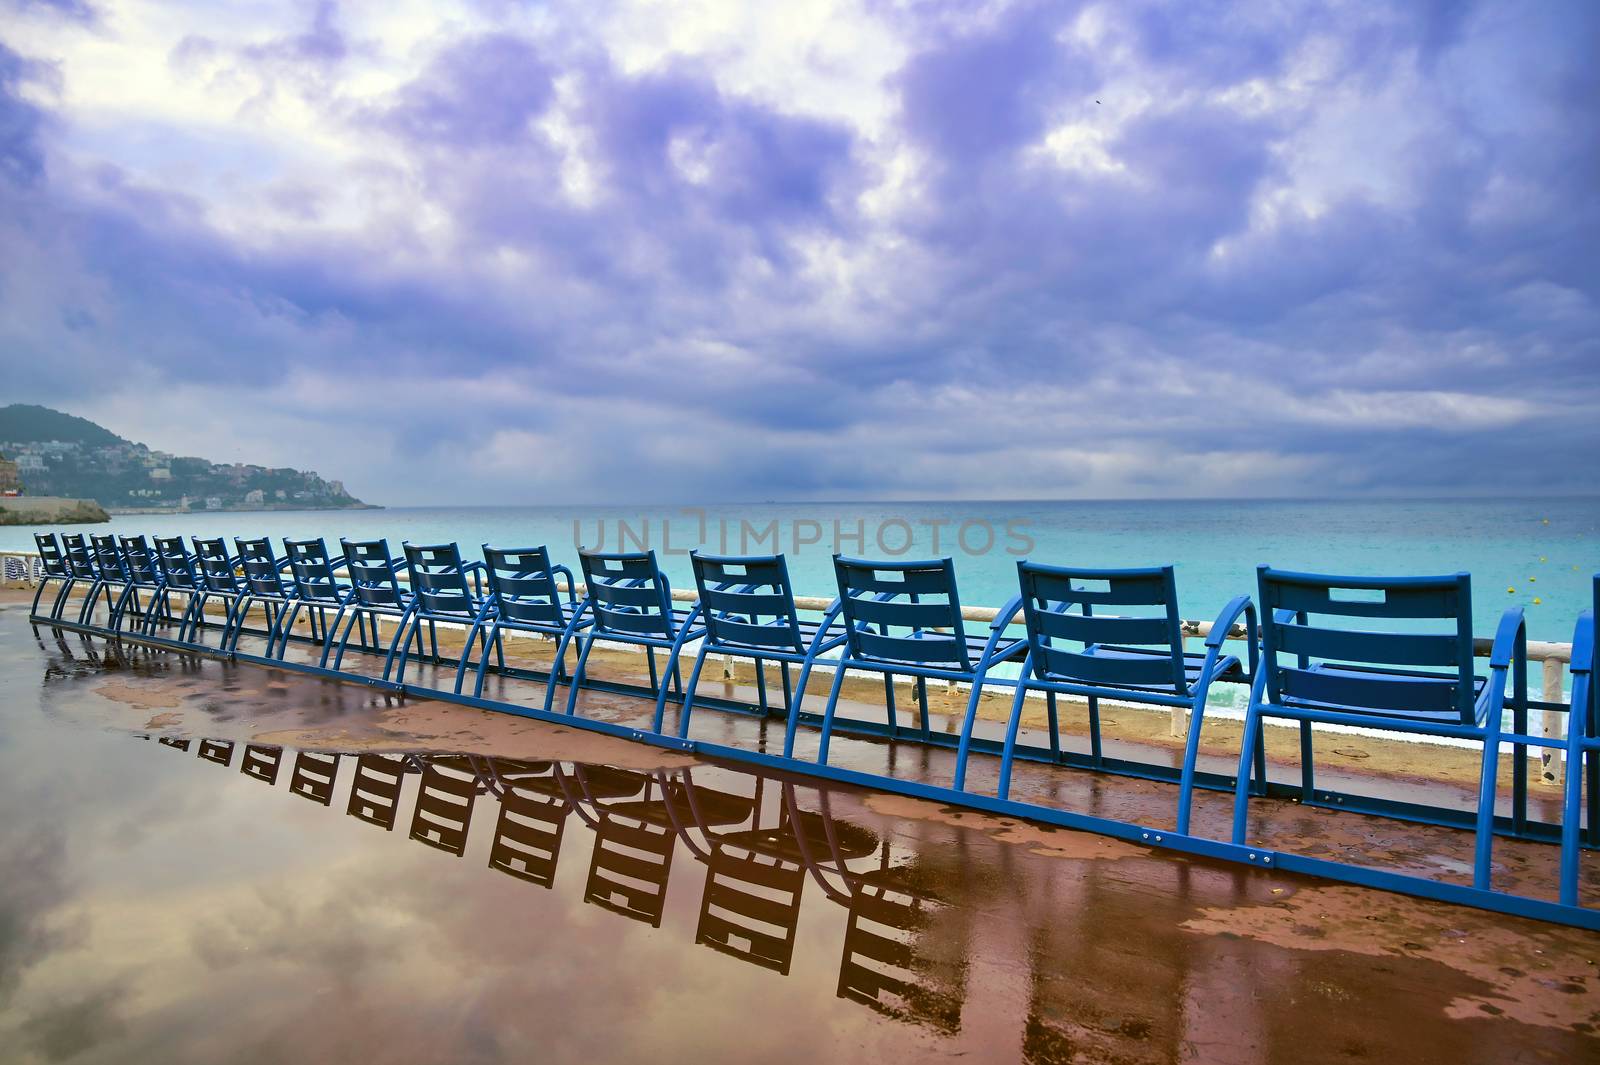 Blue chairs in Nice, France by jbyard22